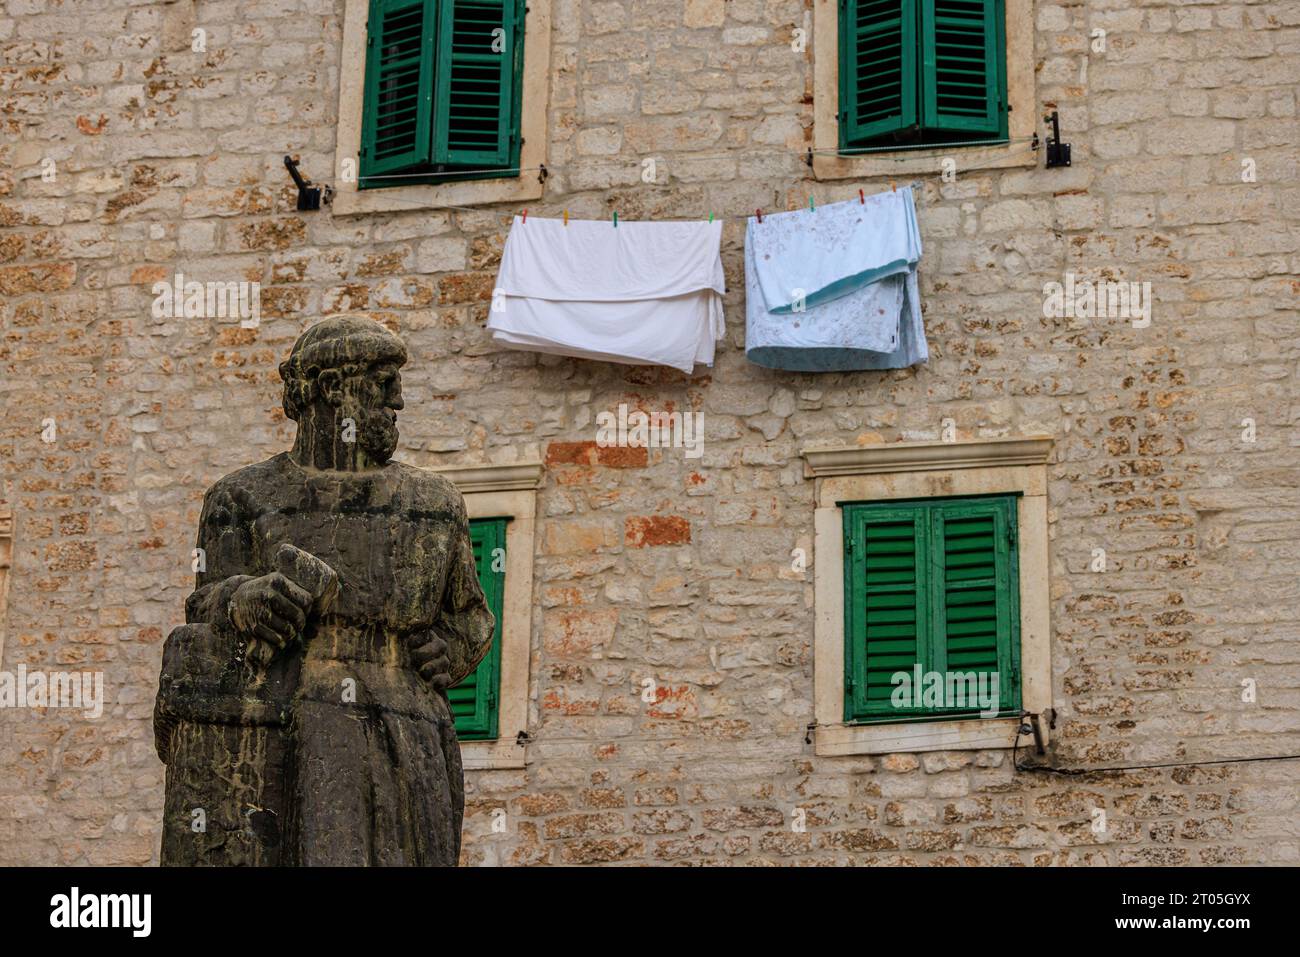 the statue of jurai dalmatinek looks in disdain at clothes hanging out to dry beneath two green shuttered windows in cathedral square sibenik croatia Stock Photo